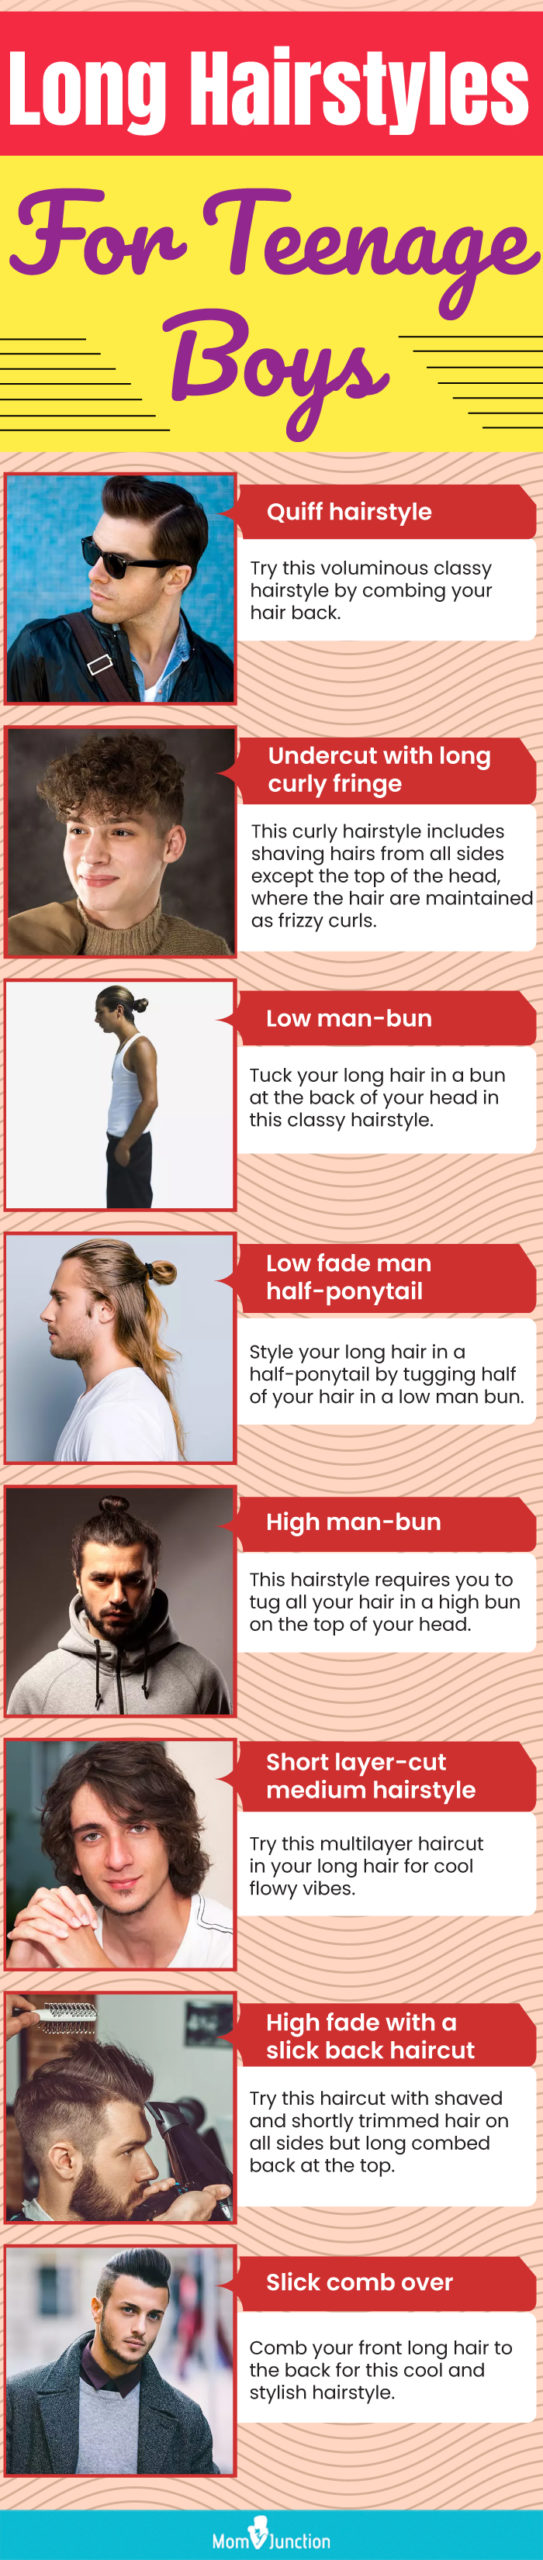 long hairstyles for teenage boys (infographic)